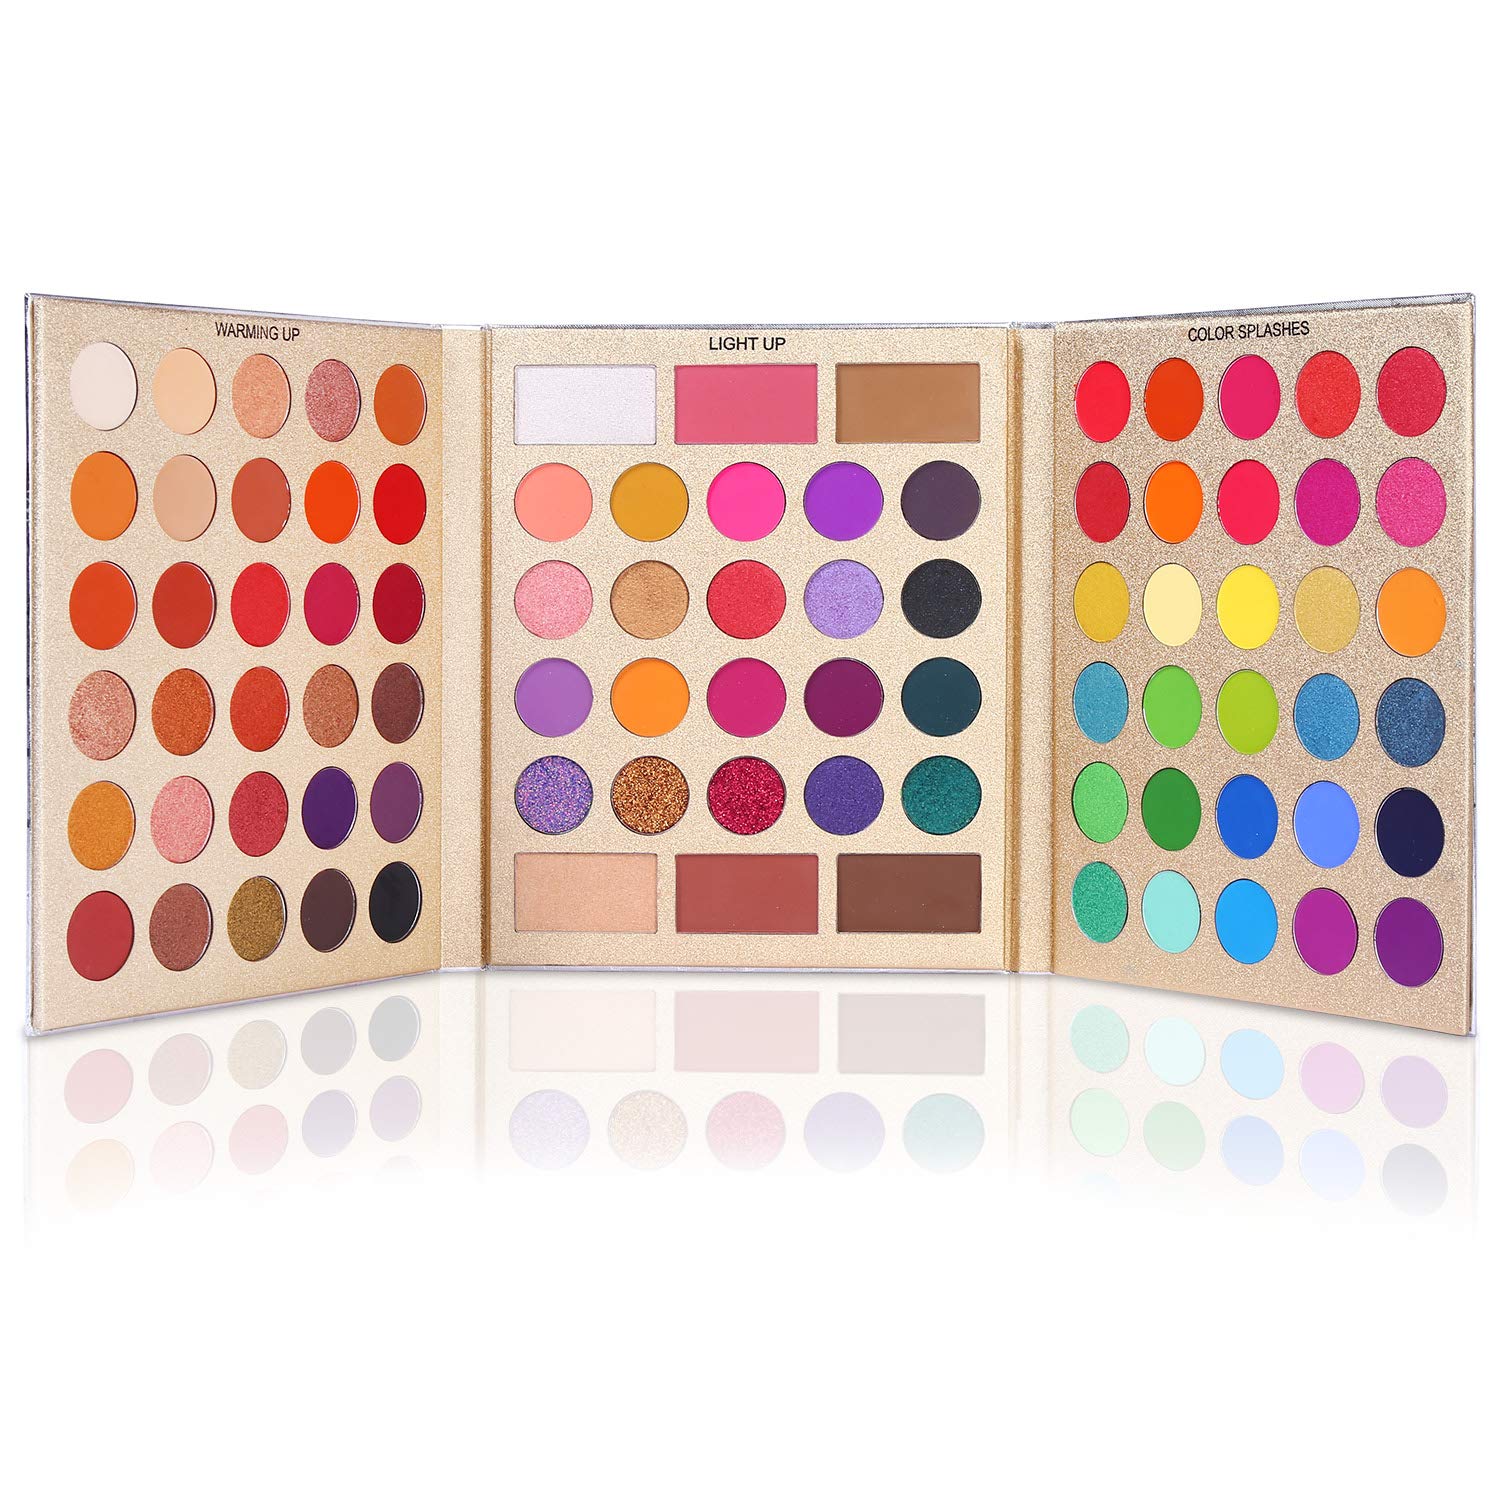  UCANBE Pretty All Set Eyeshadow Palette Holiday Gift Set Pro 86 Colors Makeup Kit Matte Shimmer Eye Shadow Highlighters Contour Blush Powder All In One Makeup Pallet